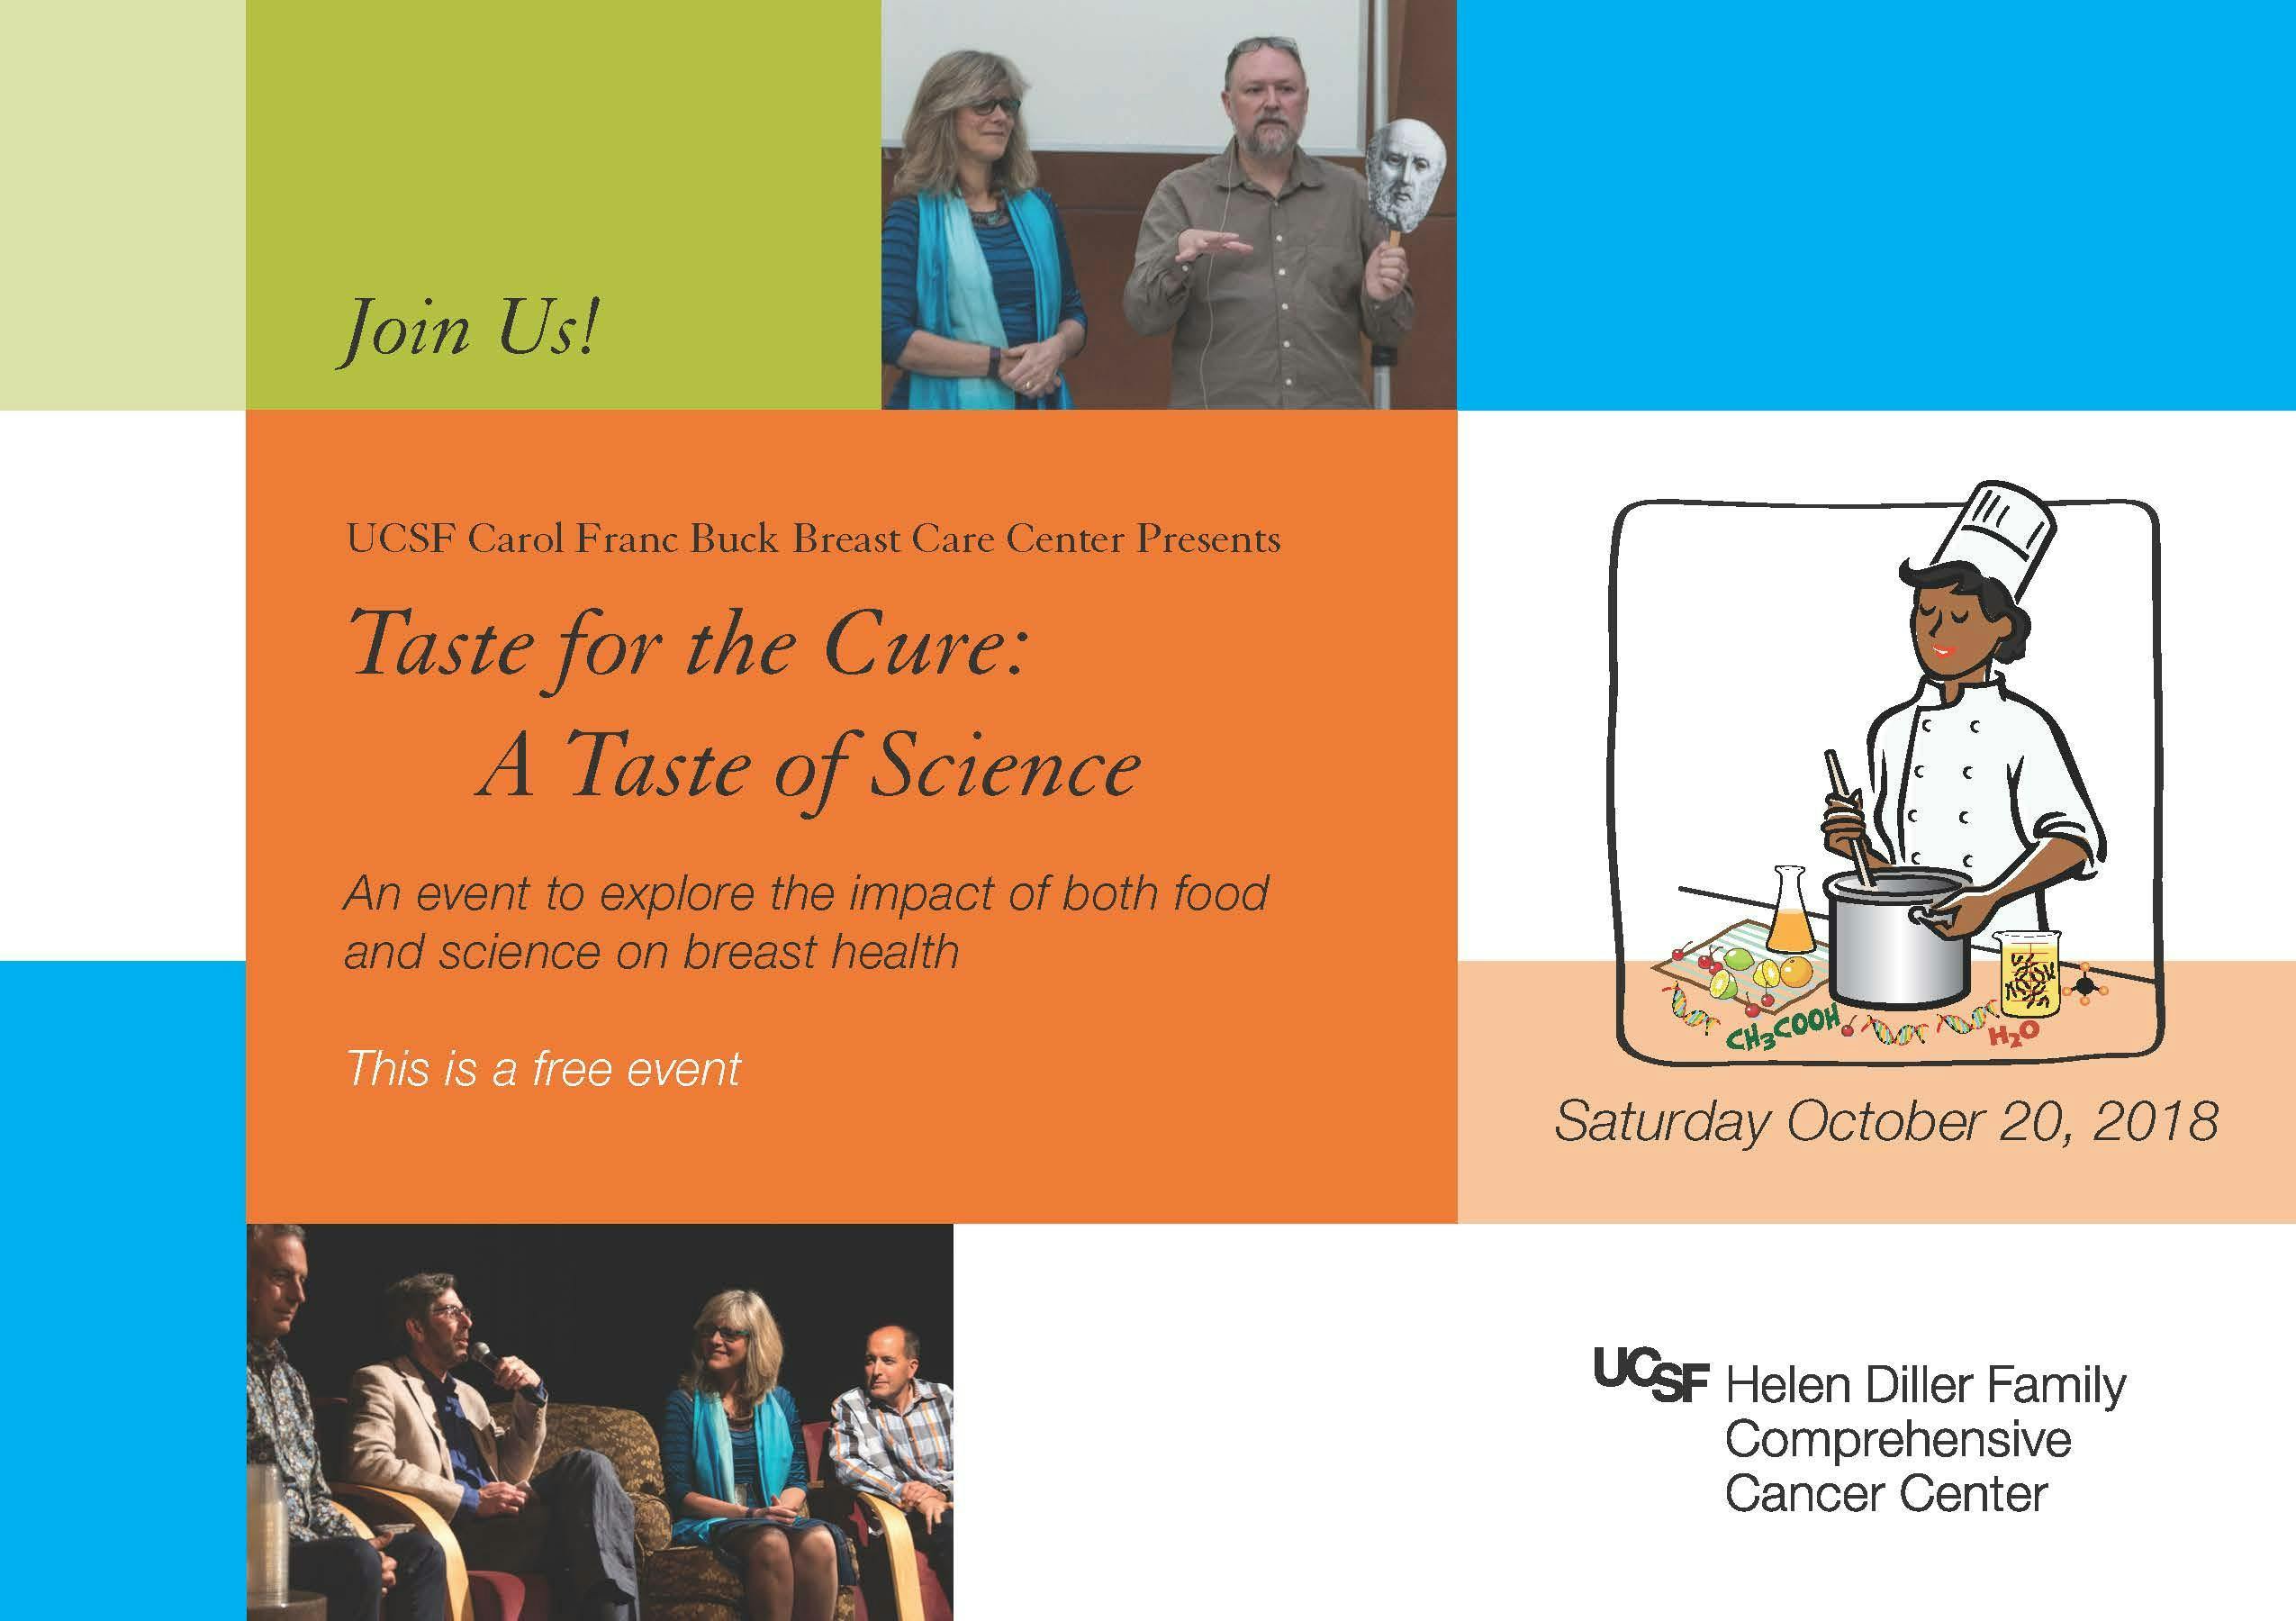 Taste for the Cure 2018: A Taste of Science